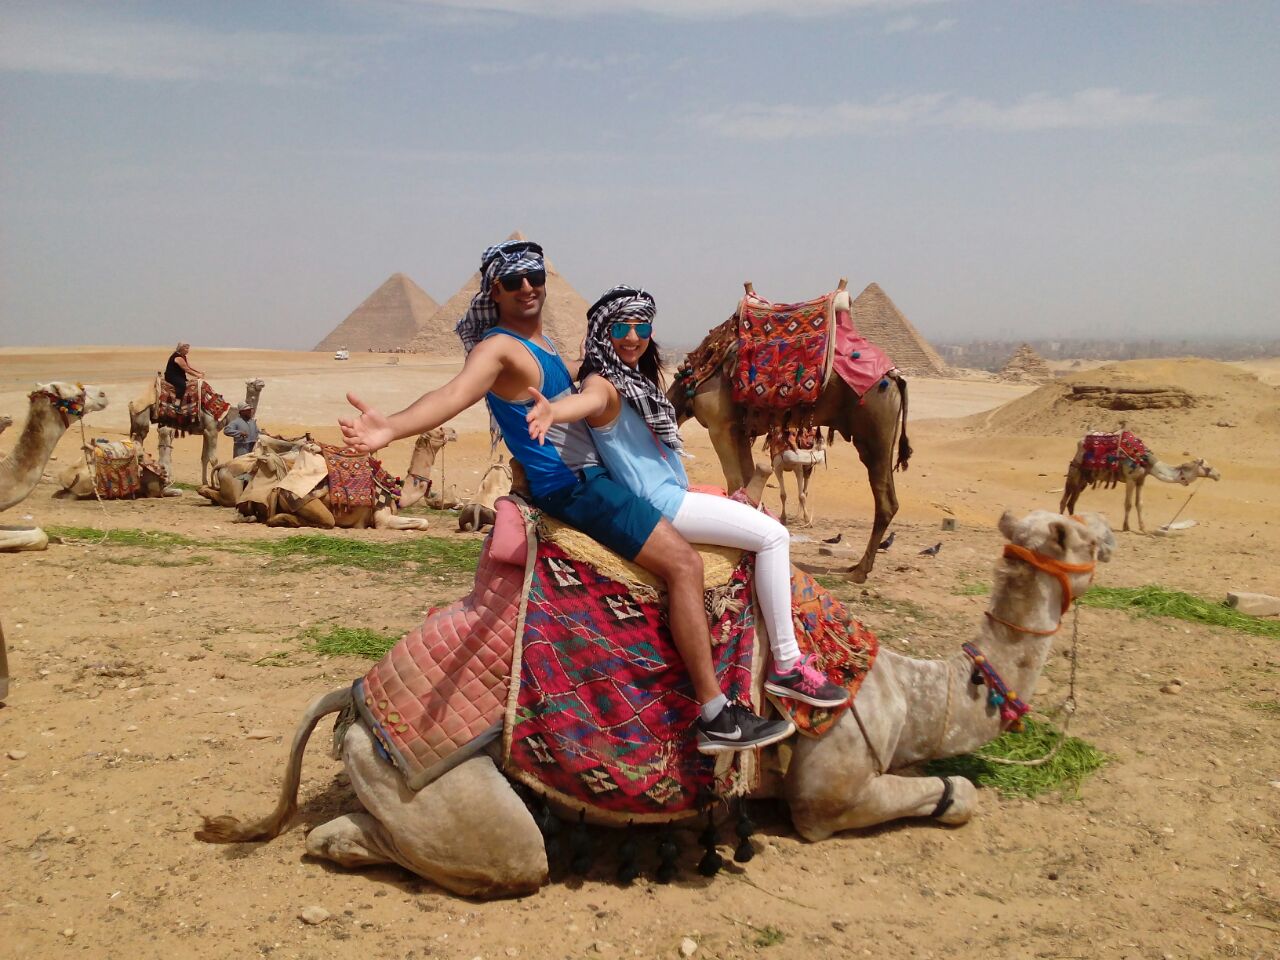 Full Day Tour to Cairo from Aswan by flight